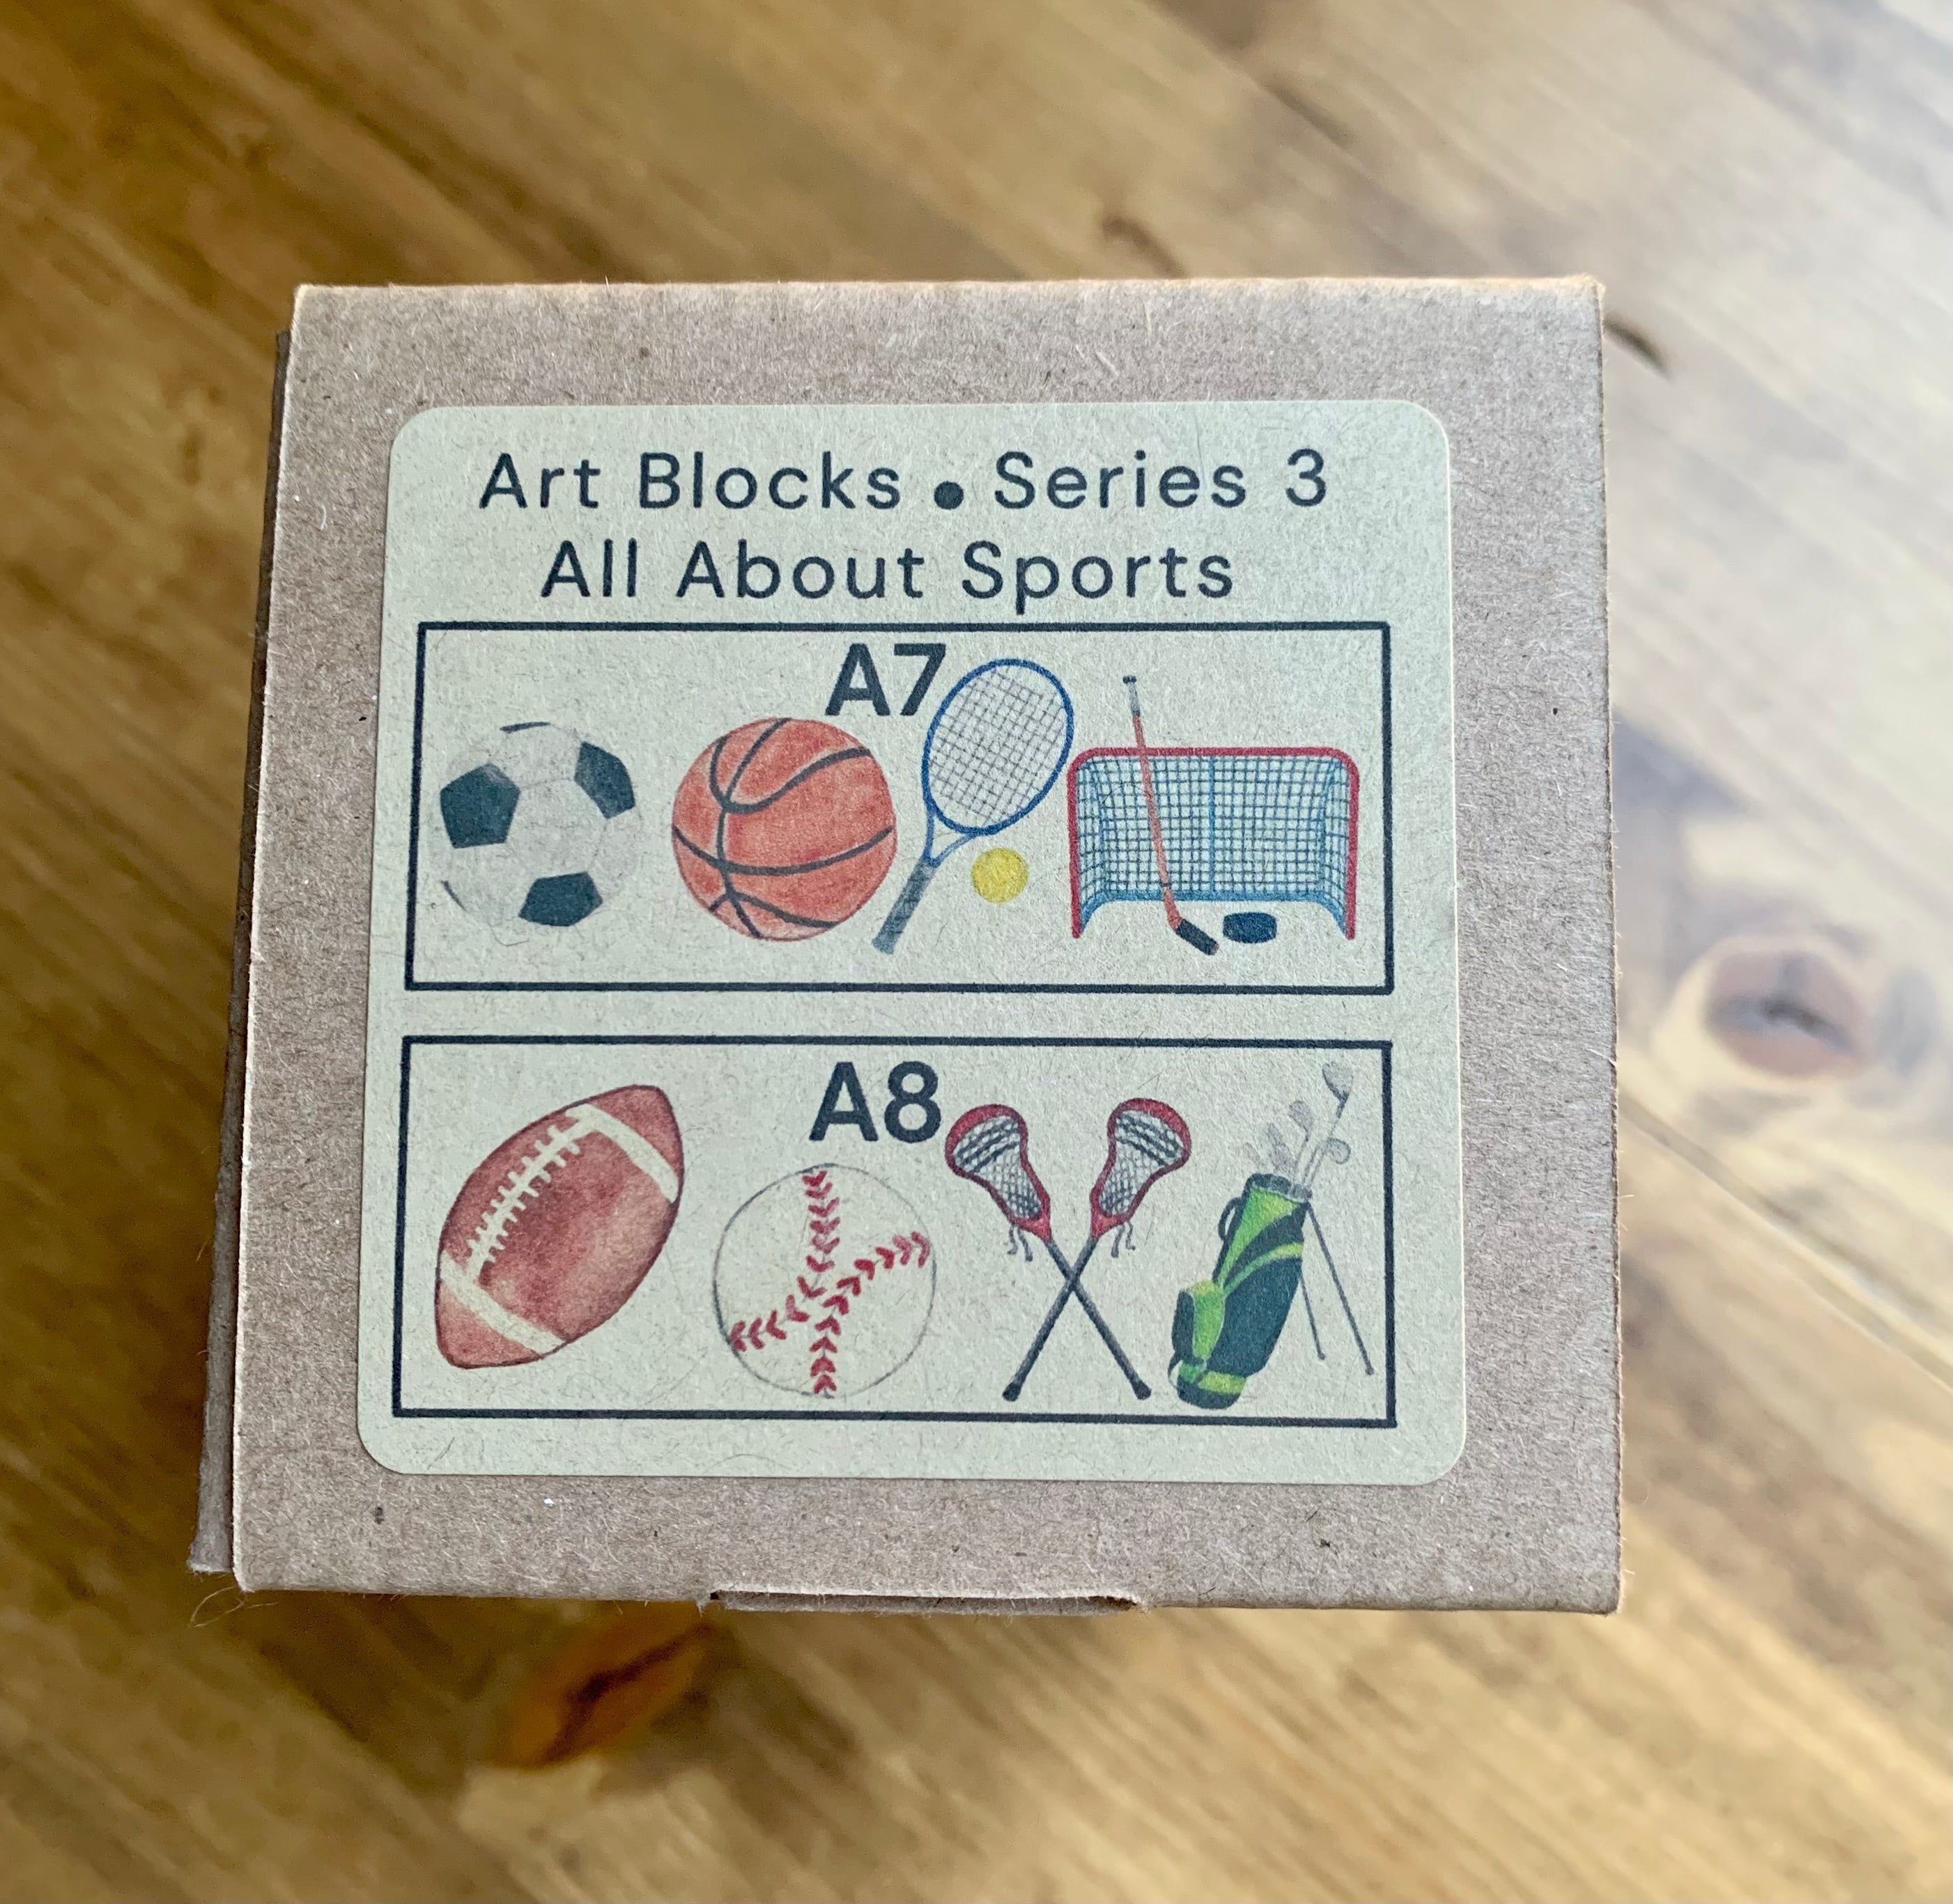 Art Blocks - Series 3 - All About Sports by Alli + Jean